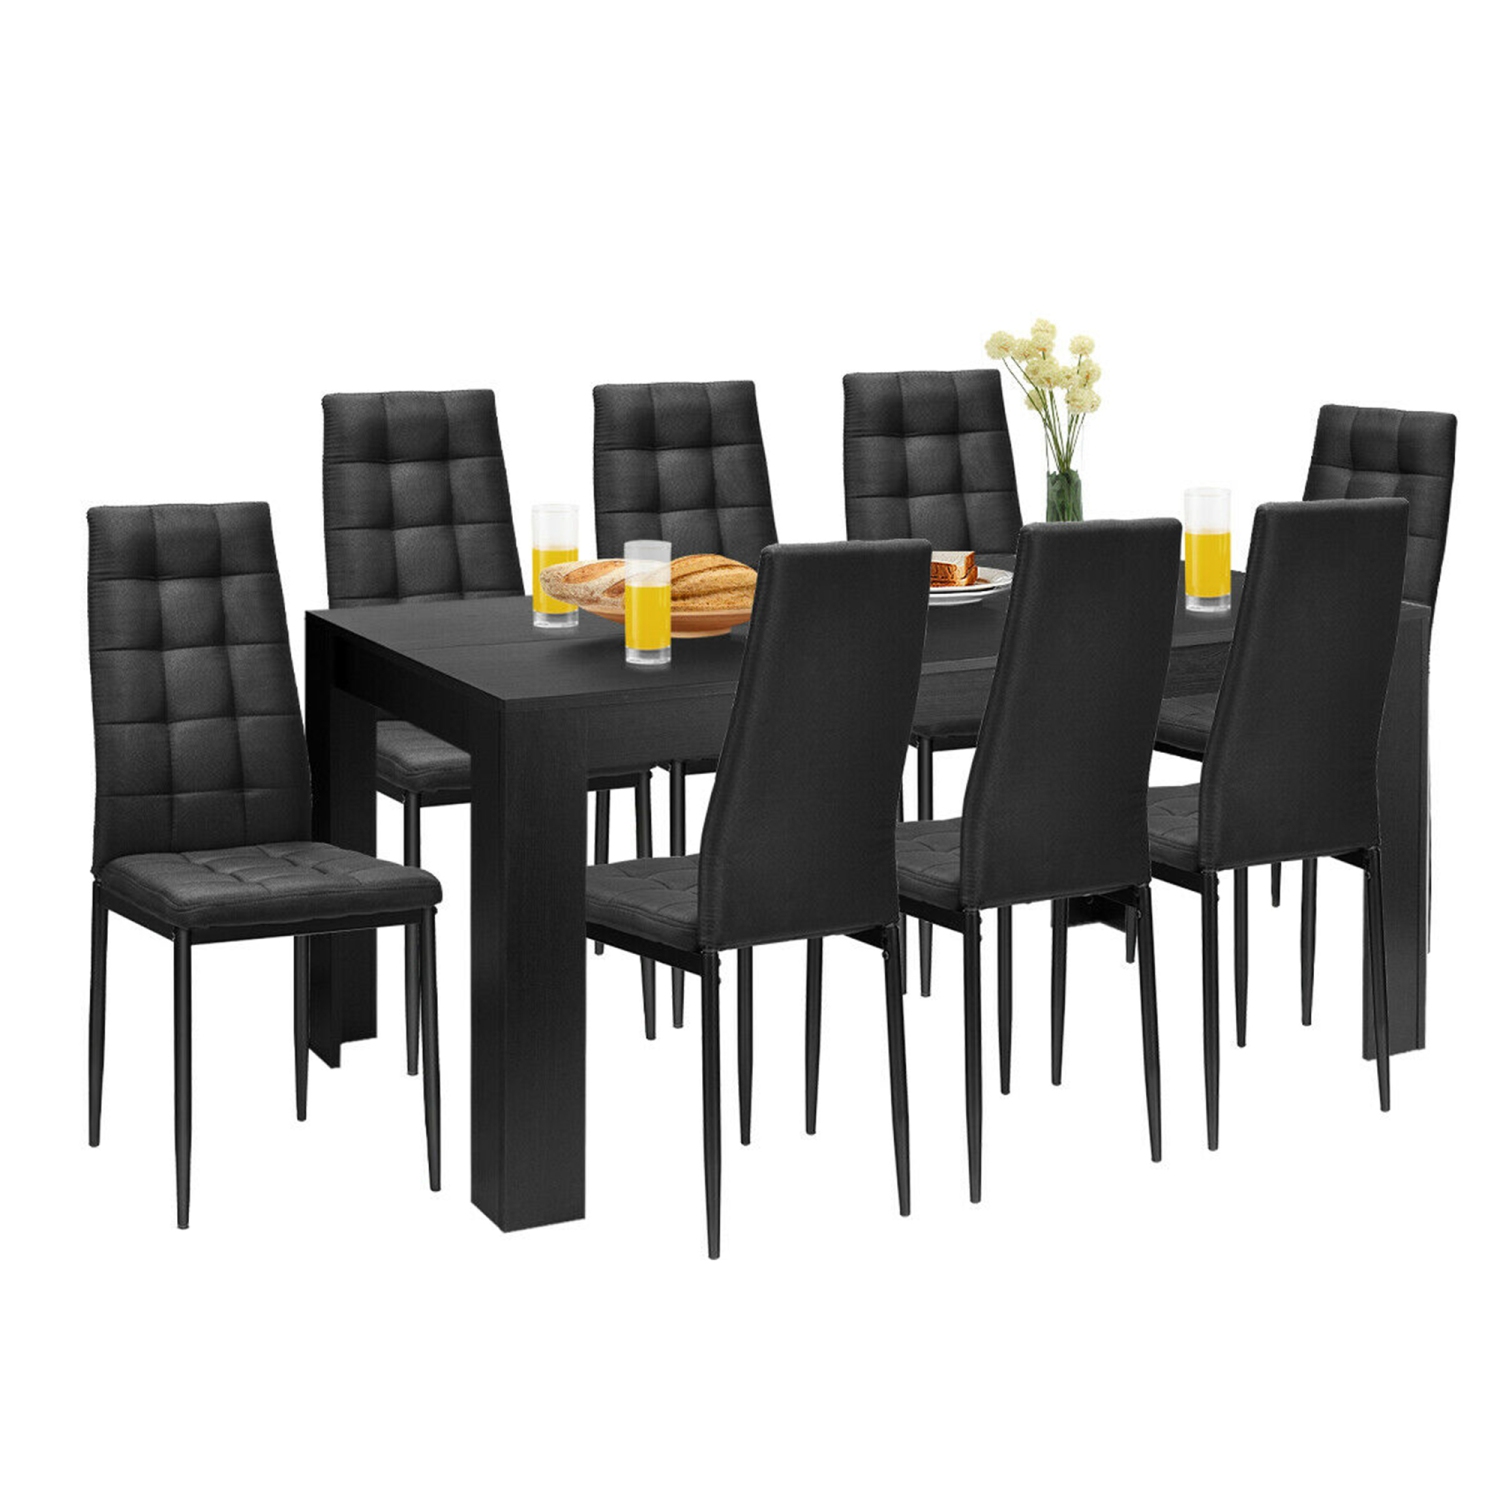 Gymax 9pcs Dining Set Wood Table and 8 Fabric Chairs Home Kitchen Modern